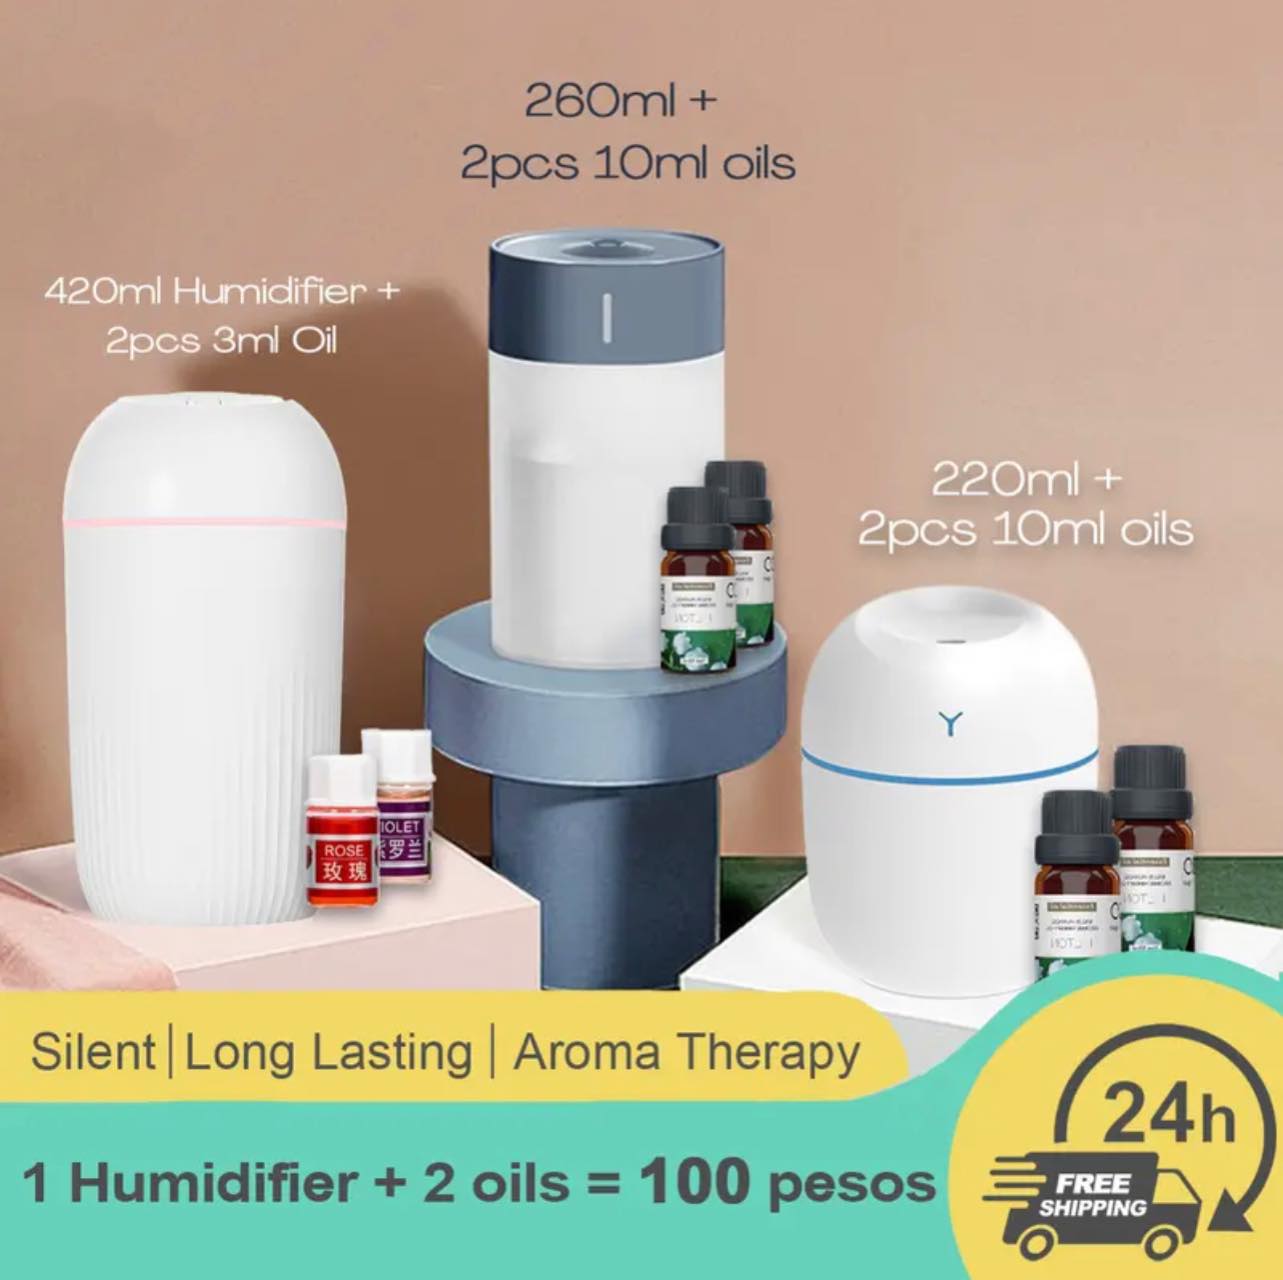 Jcam Humidifier Bundle: 3PCS for 100 Pesos, with Free Essential O